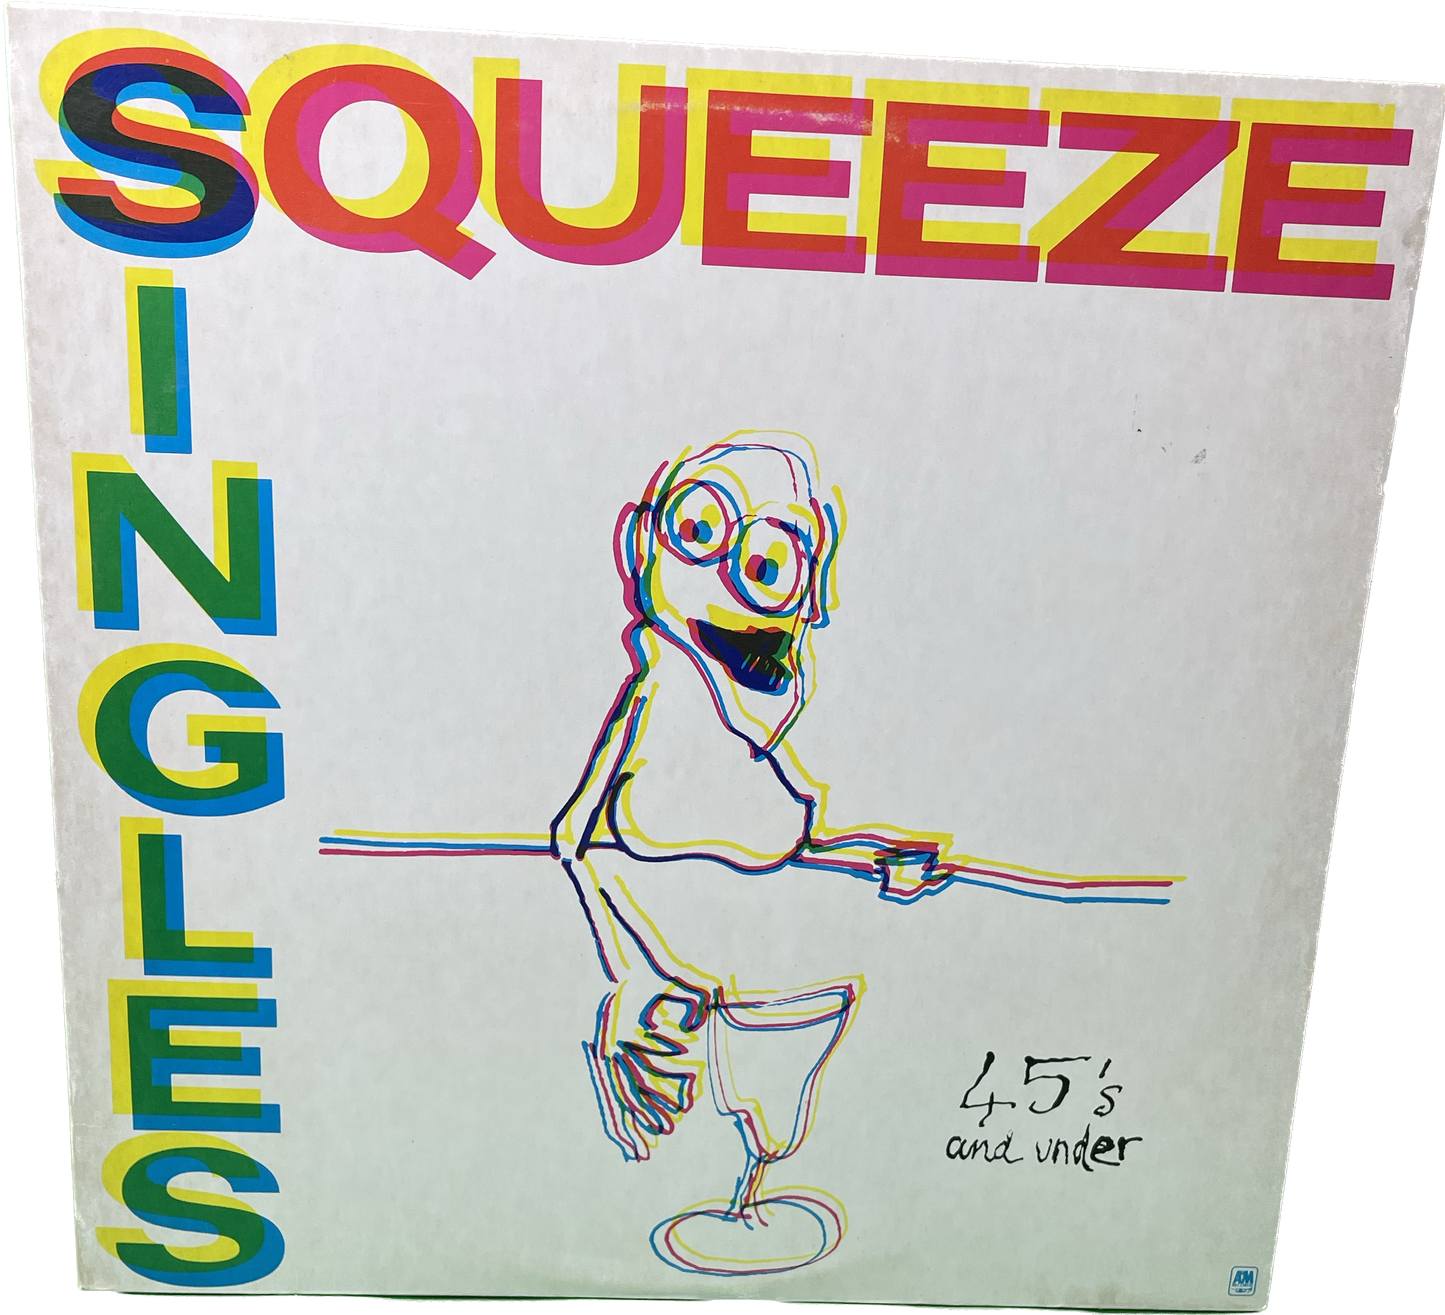 VG VG Squeeze - Singles 45's and Under LP A&M SP-4922  1982 Pressing